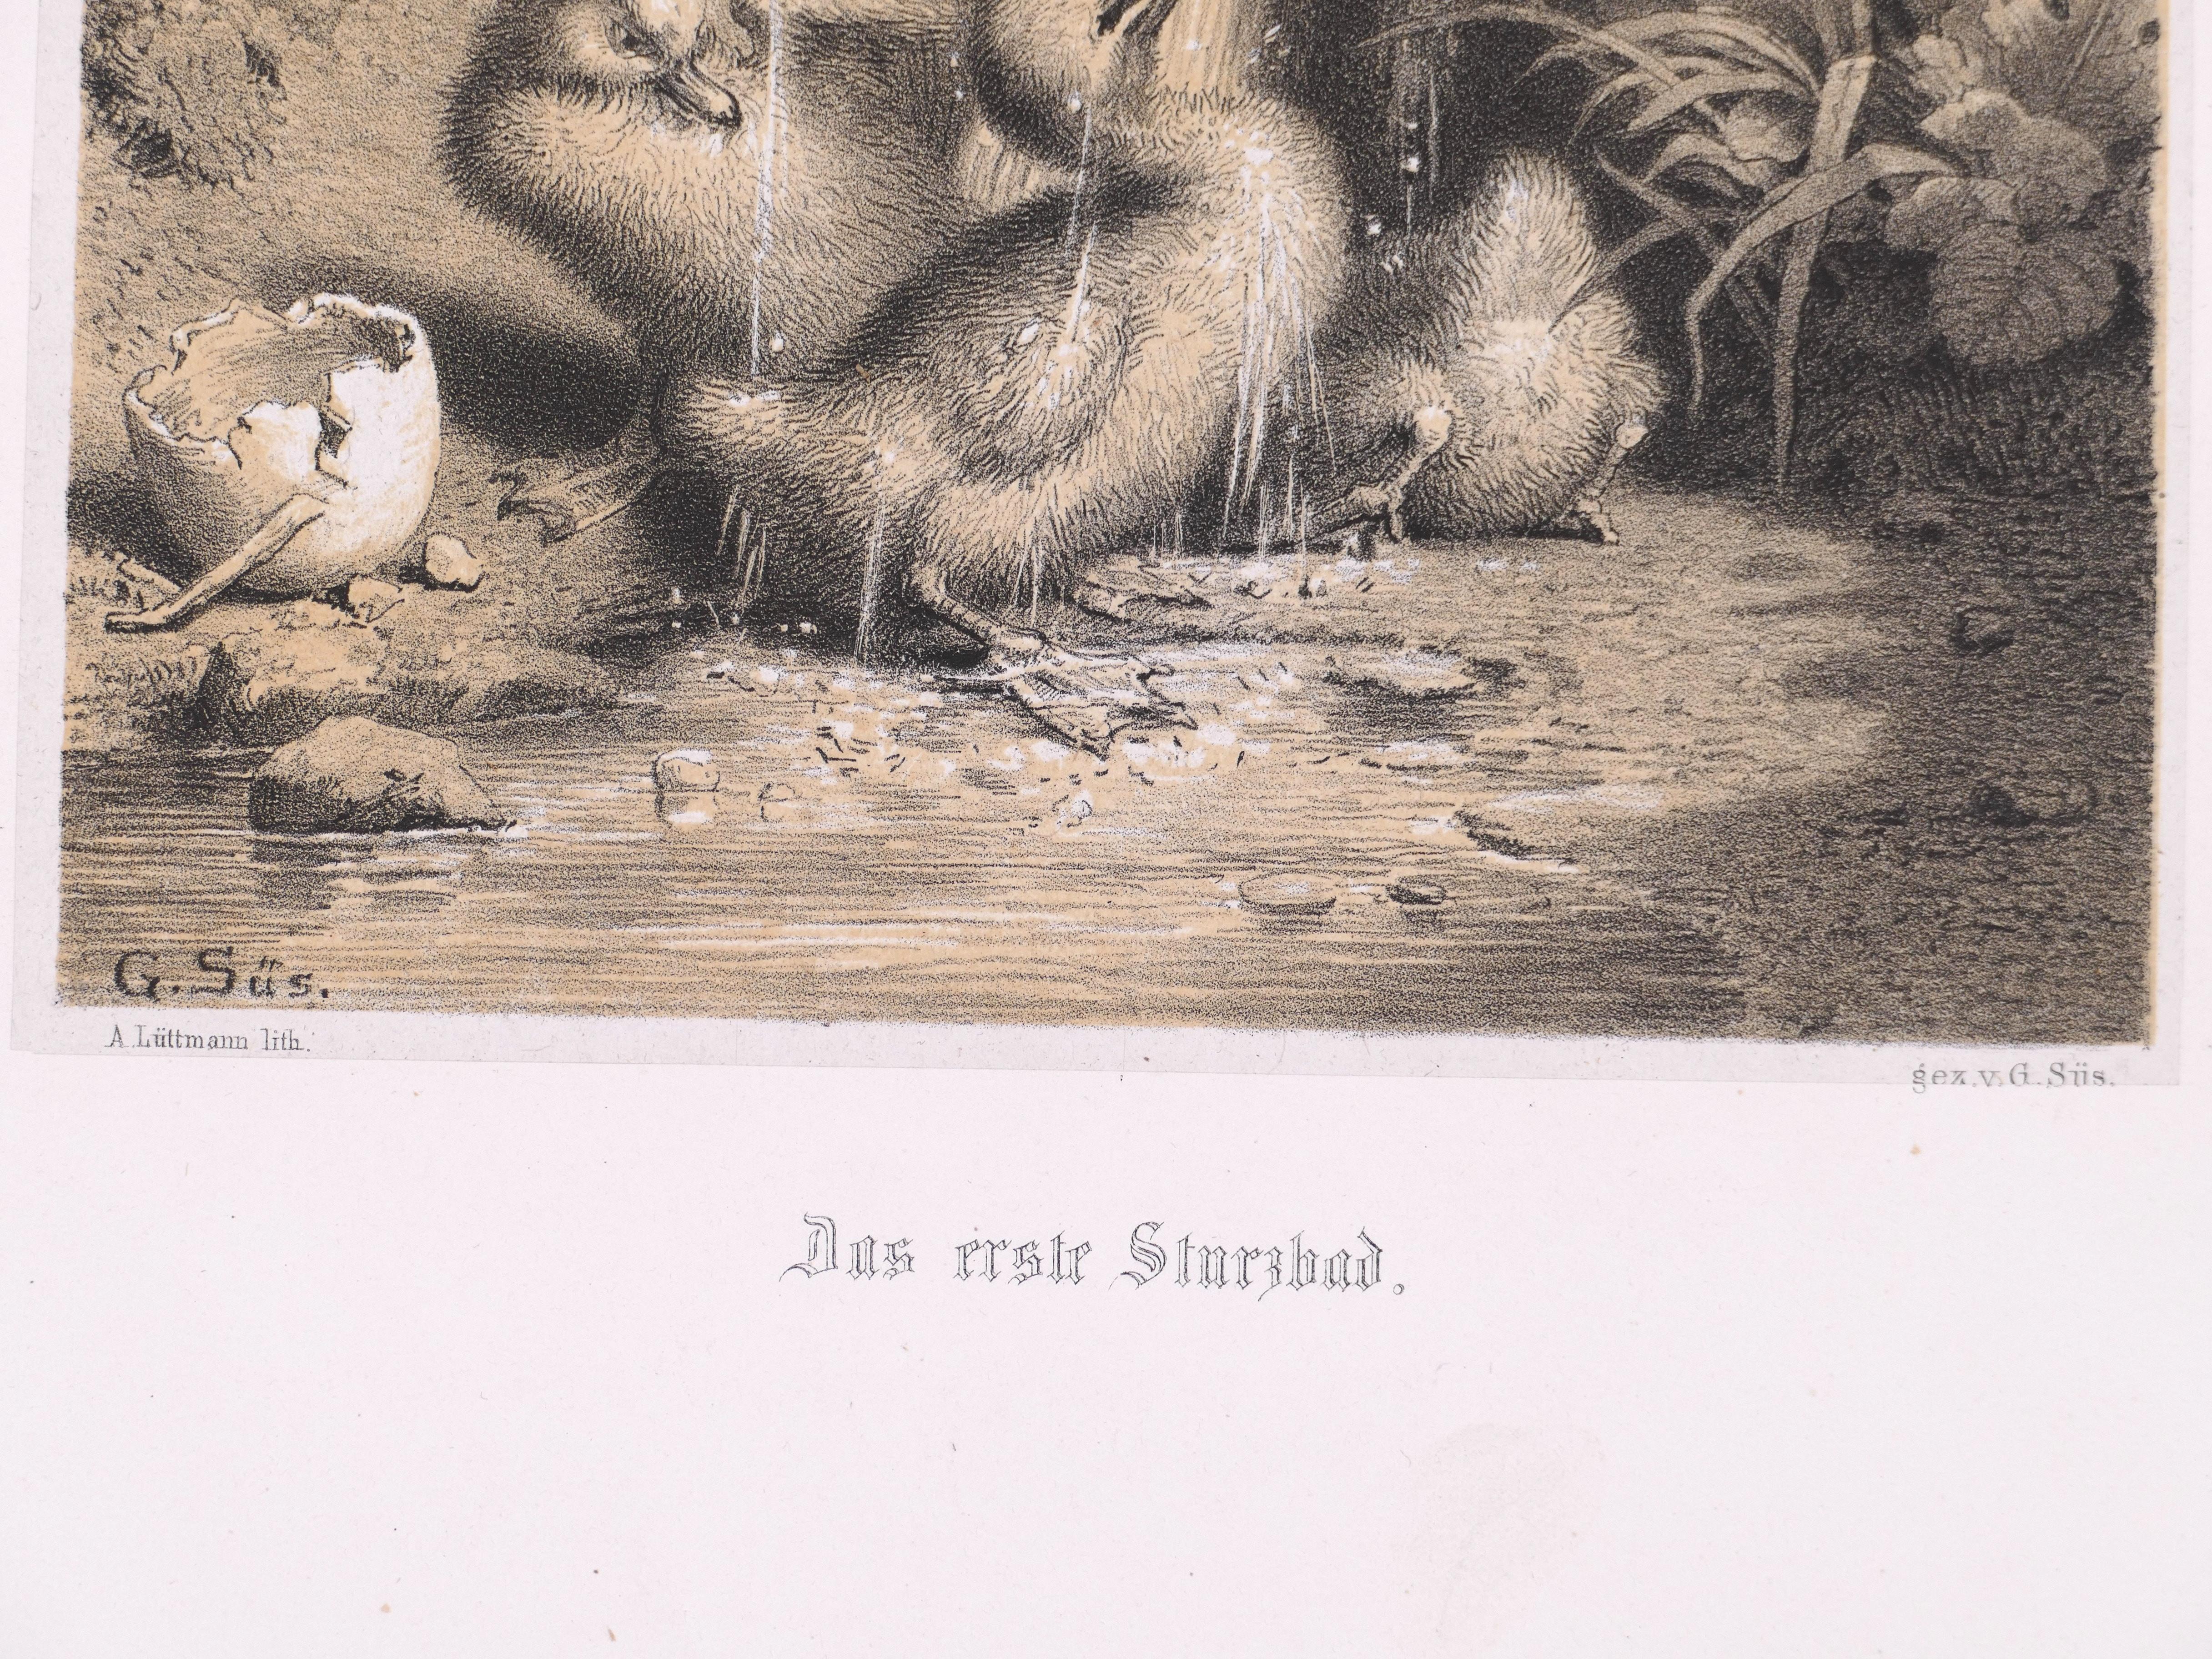 A Little Duckling - Original Lithograph - Late 19th Century - Brown Figurative Print by Unknown